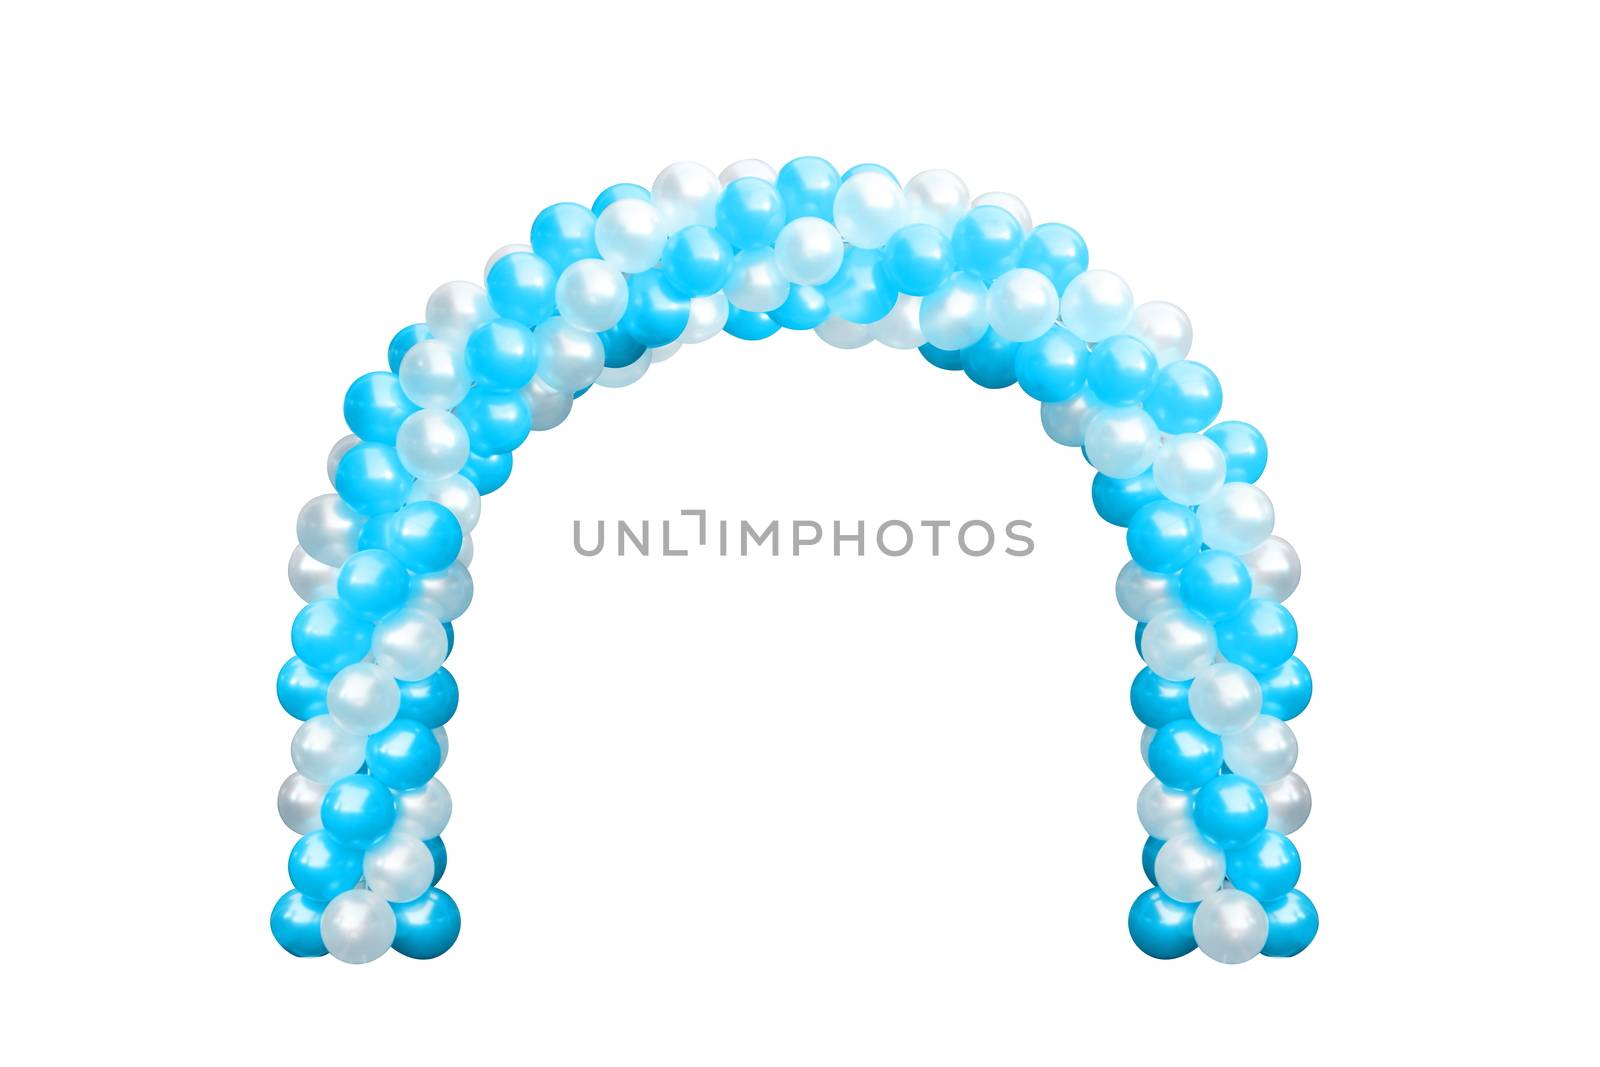 Balloon Archway door Blue and white, Arches wedding, Balloon Festival design decoration elements with arch floral design isolated on white Background by cgdeaw